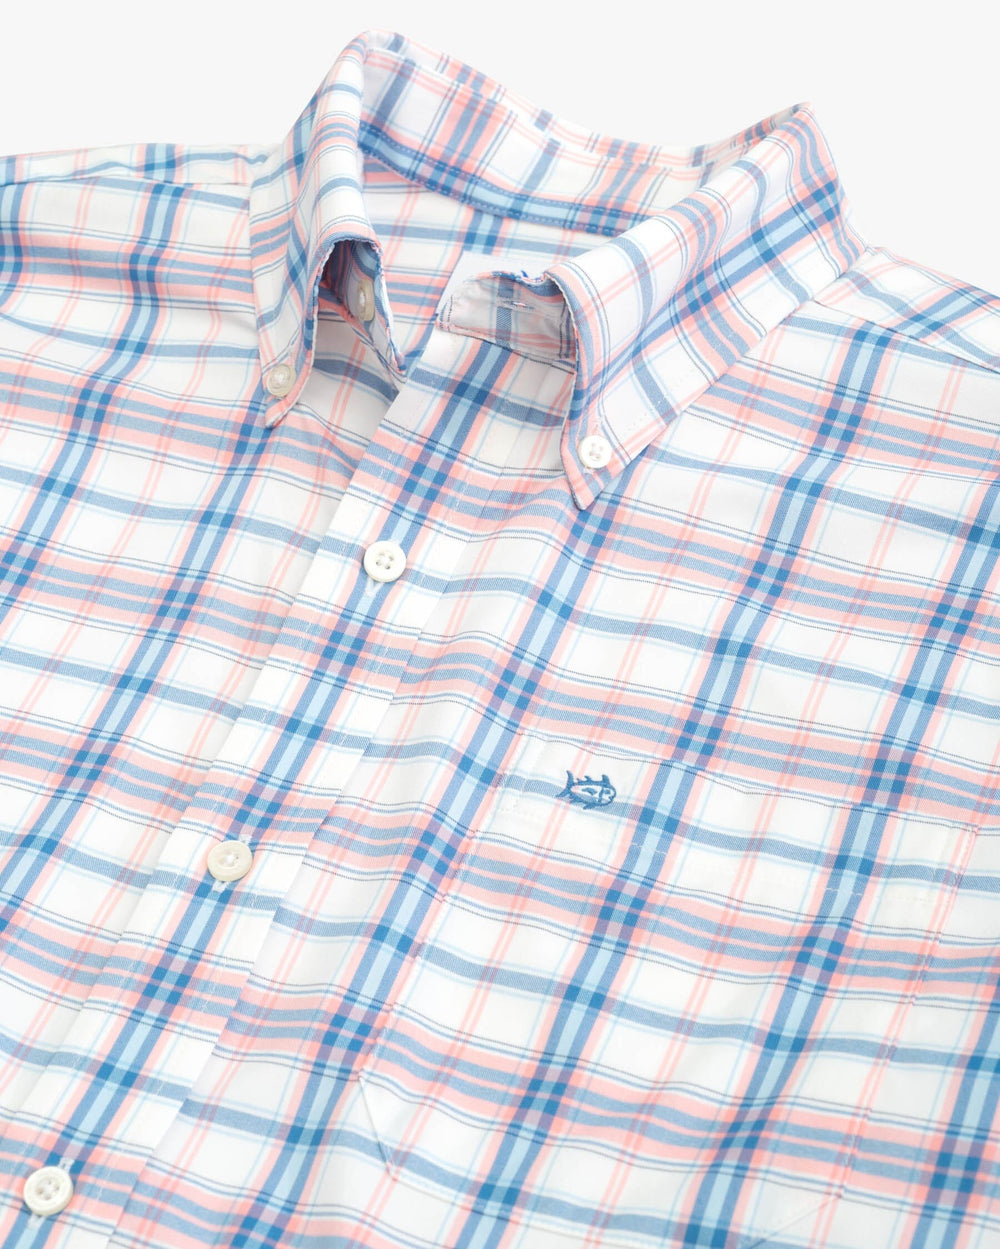 The detail view of the Southern Tide Sapelo Plaid Intercoastal Sport Shirt by Southern Tide - Flamingo Pink